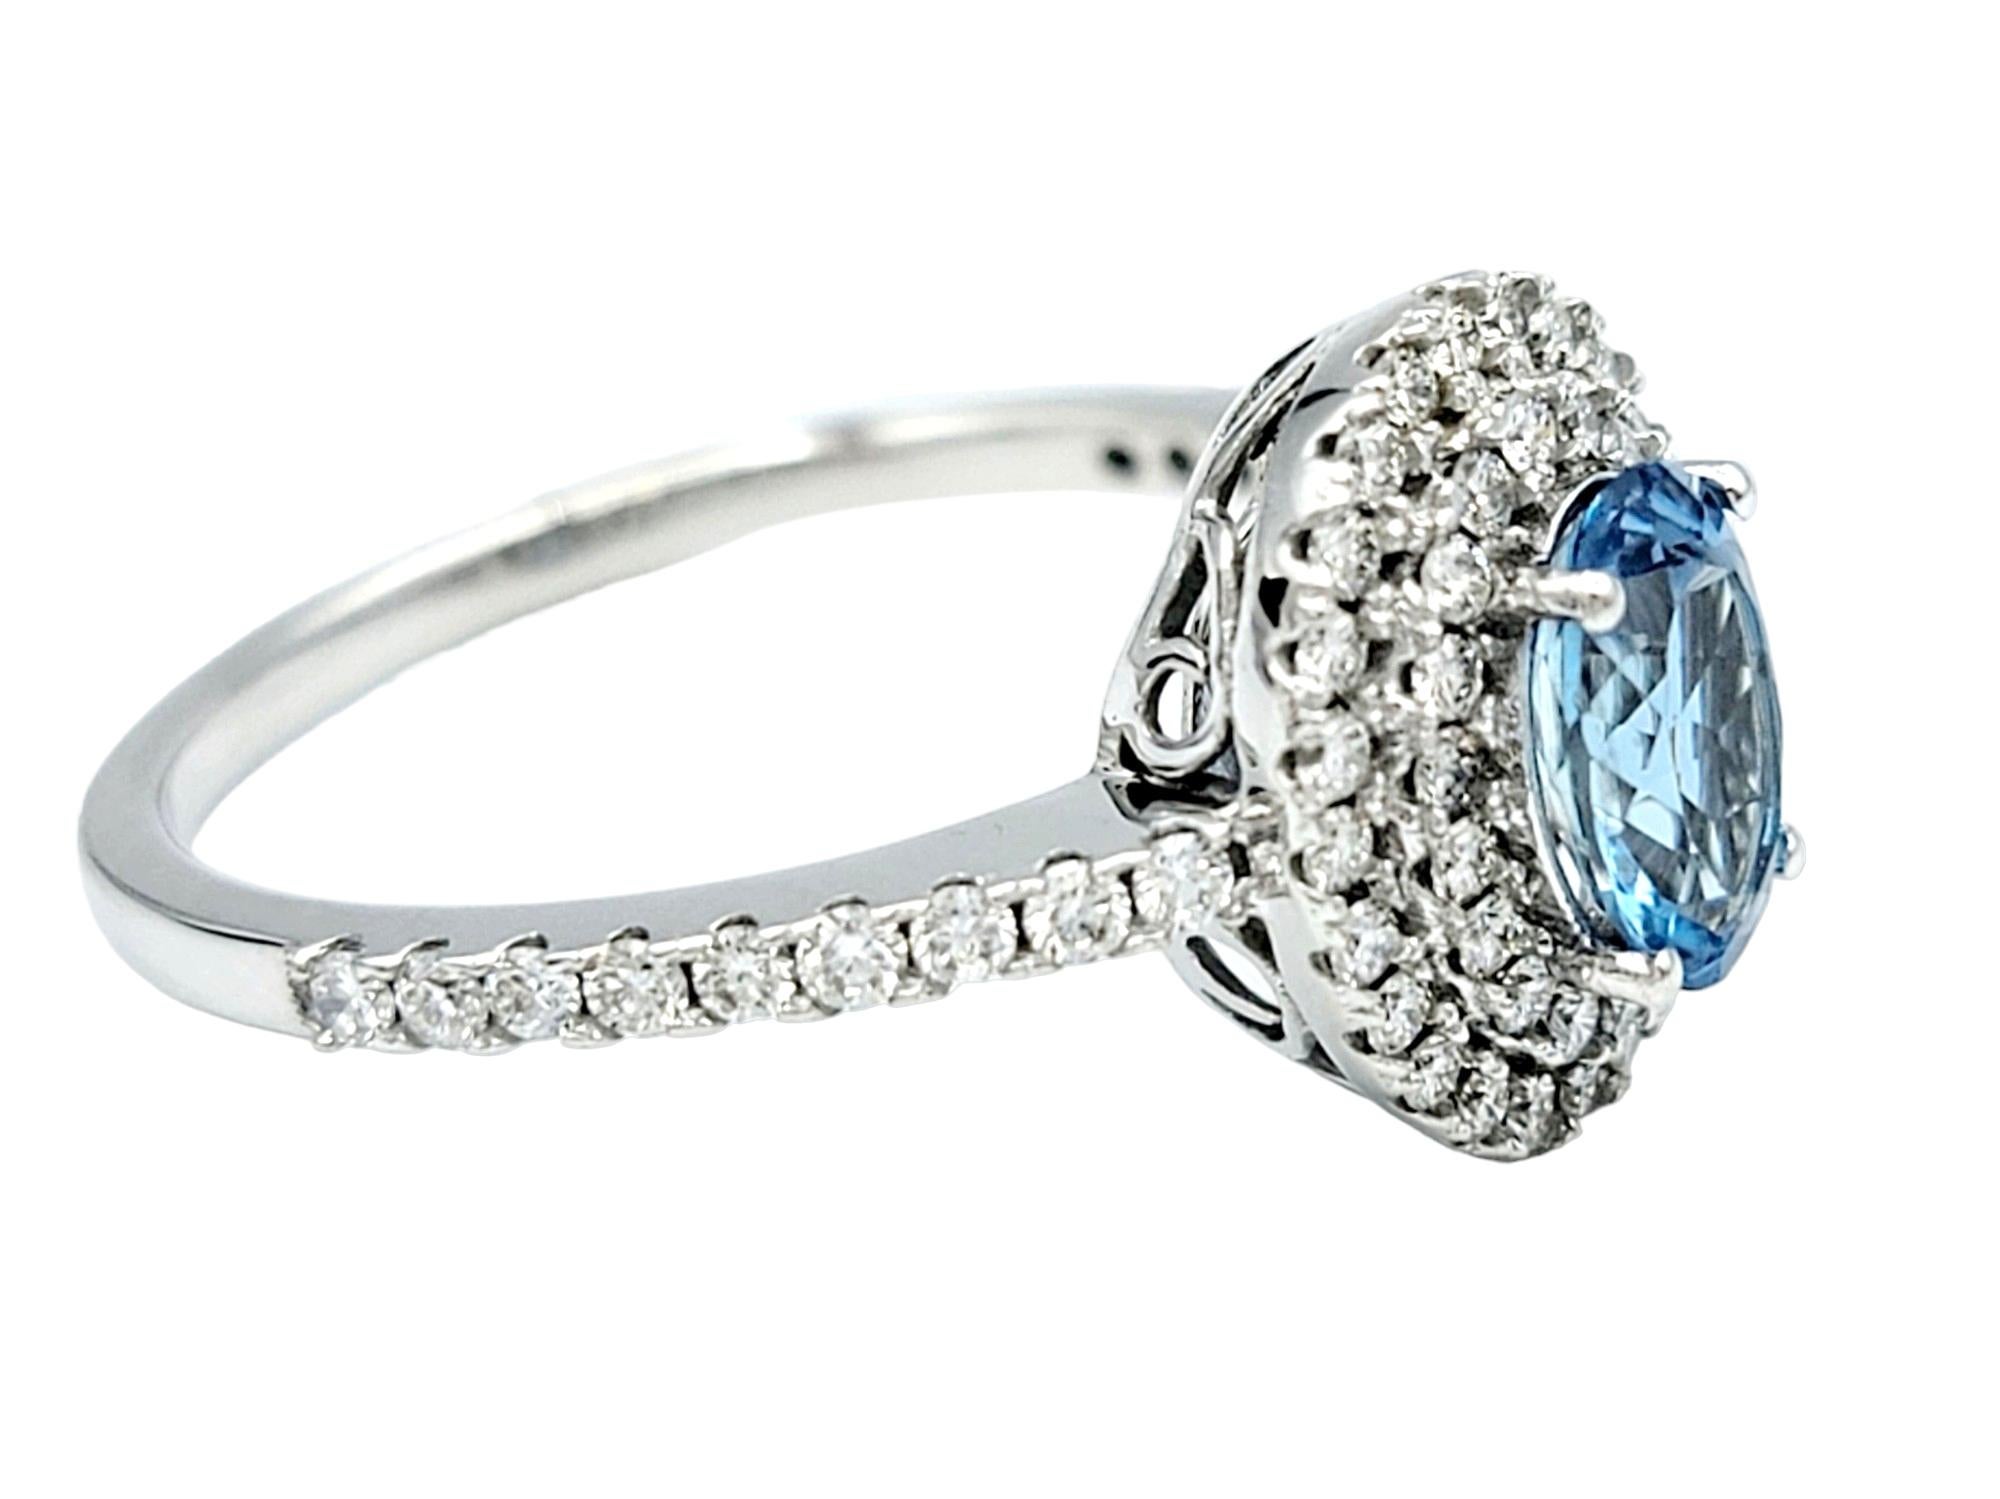 Oval Cut Aquamarine and Pavé Diamond Double Halo Ring Set in 18 Karat White Gold For Sale 1